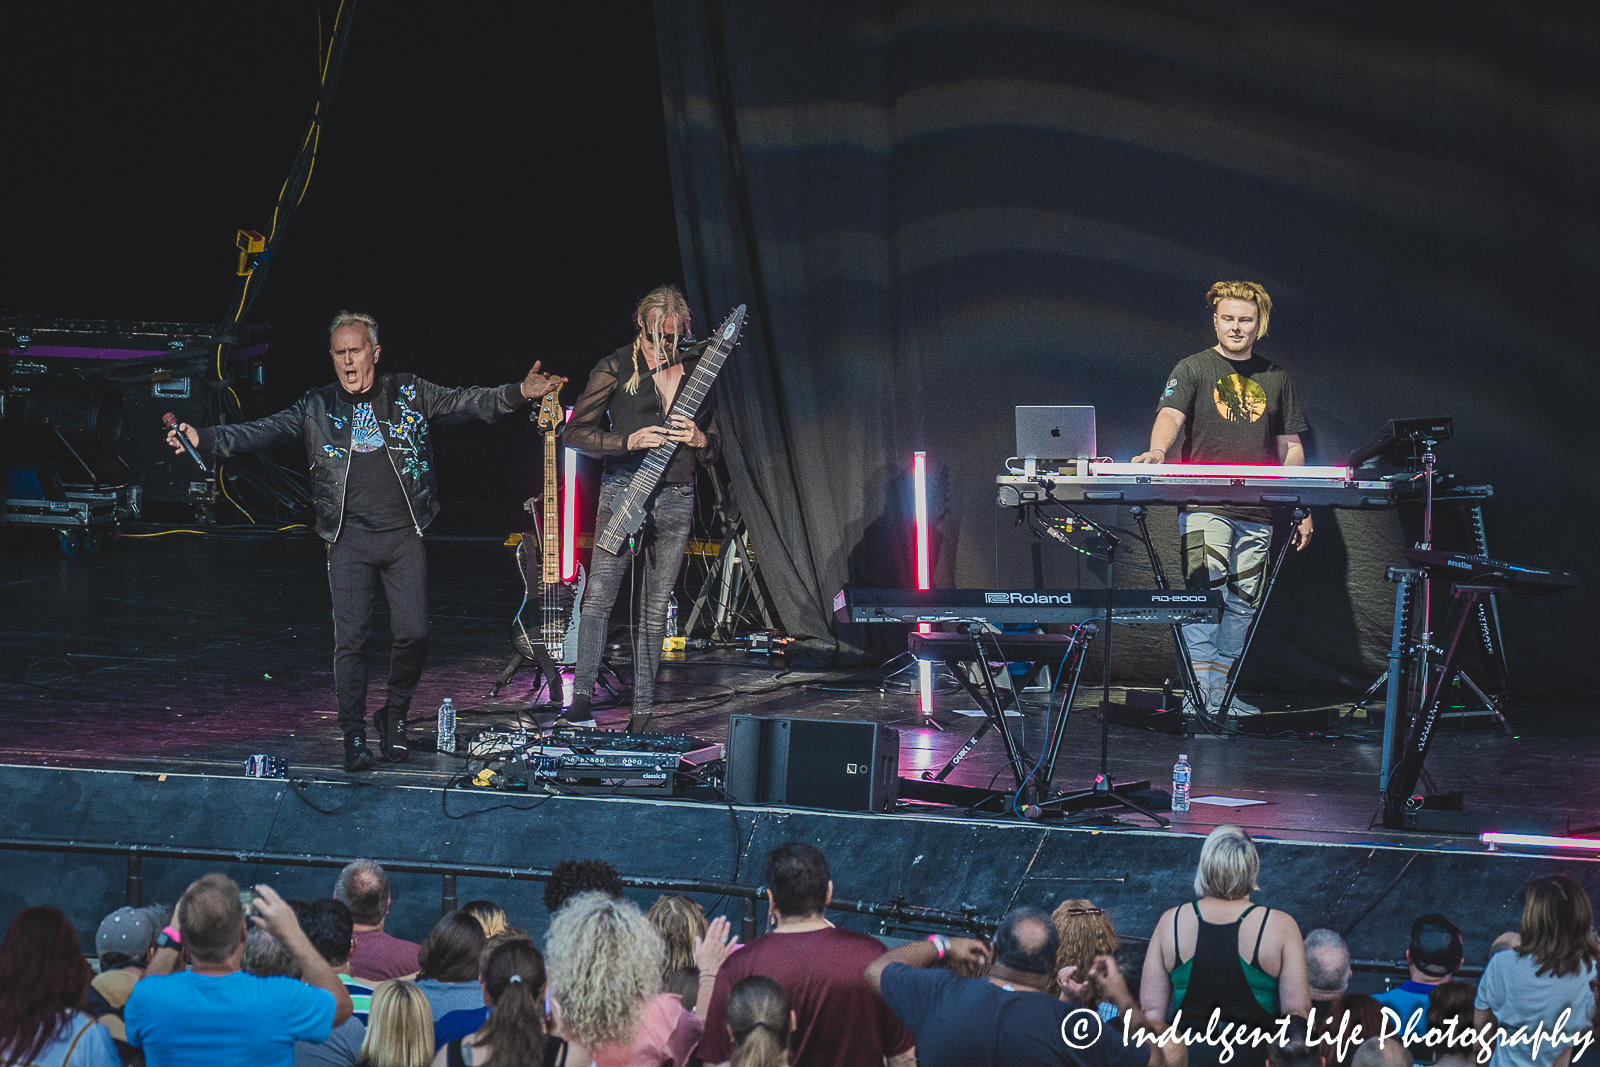 Starlight Theatre concert in Kansas City, MO featuring Howard Jones with bass guitarist Nick Beggs and keyboard player Dan Clarke on August 8, 2023.